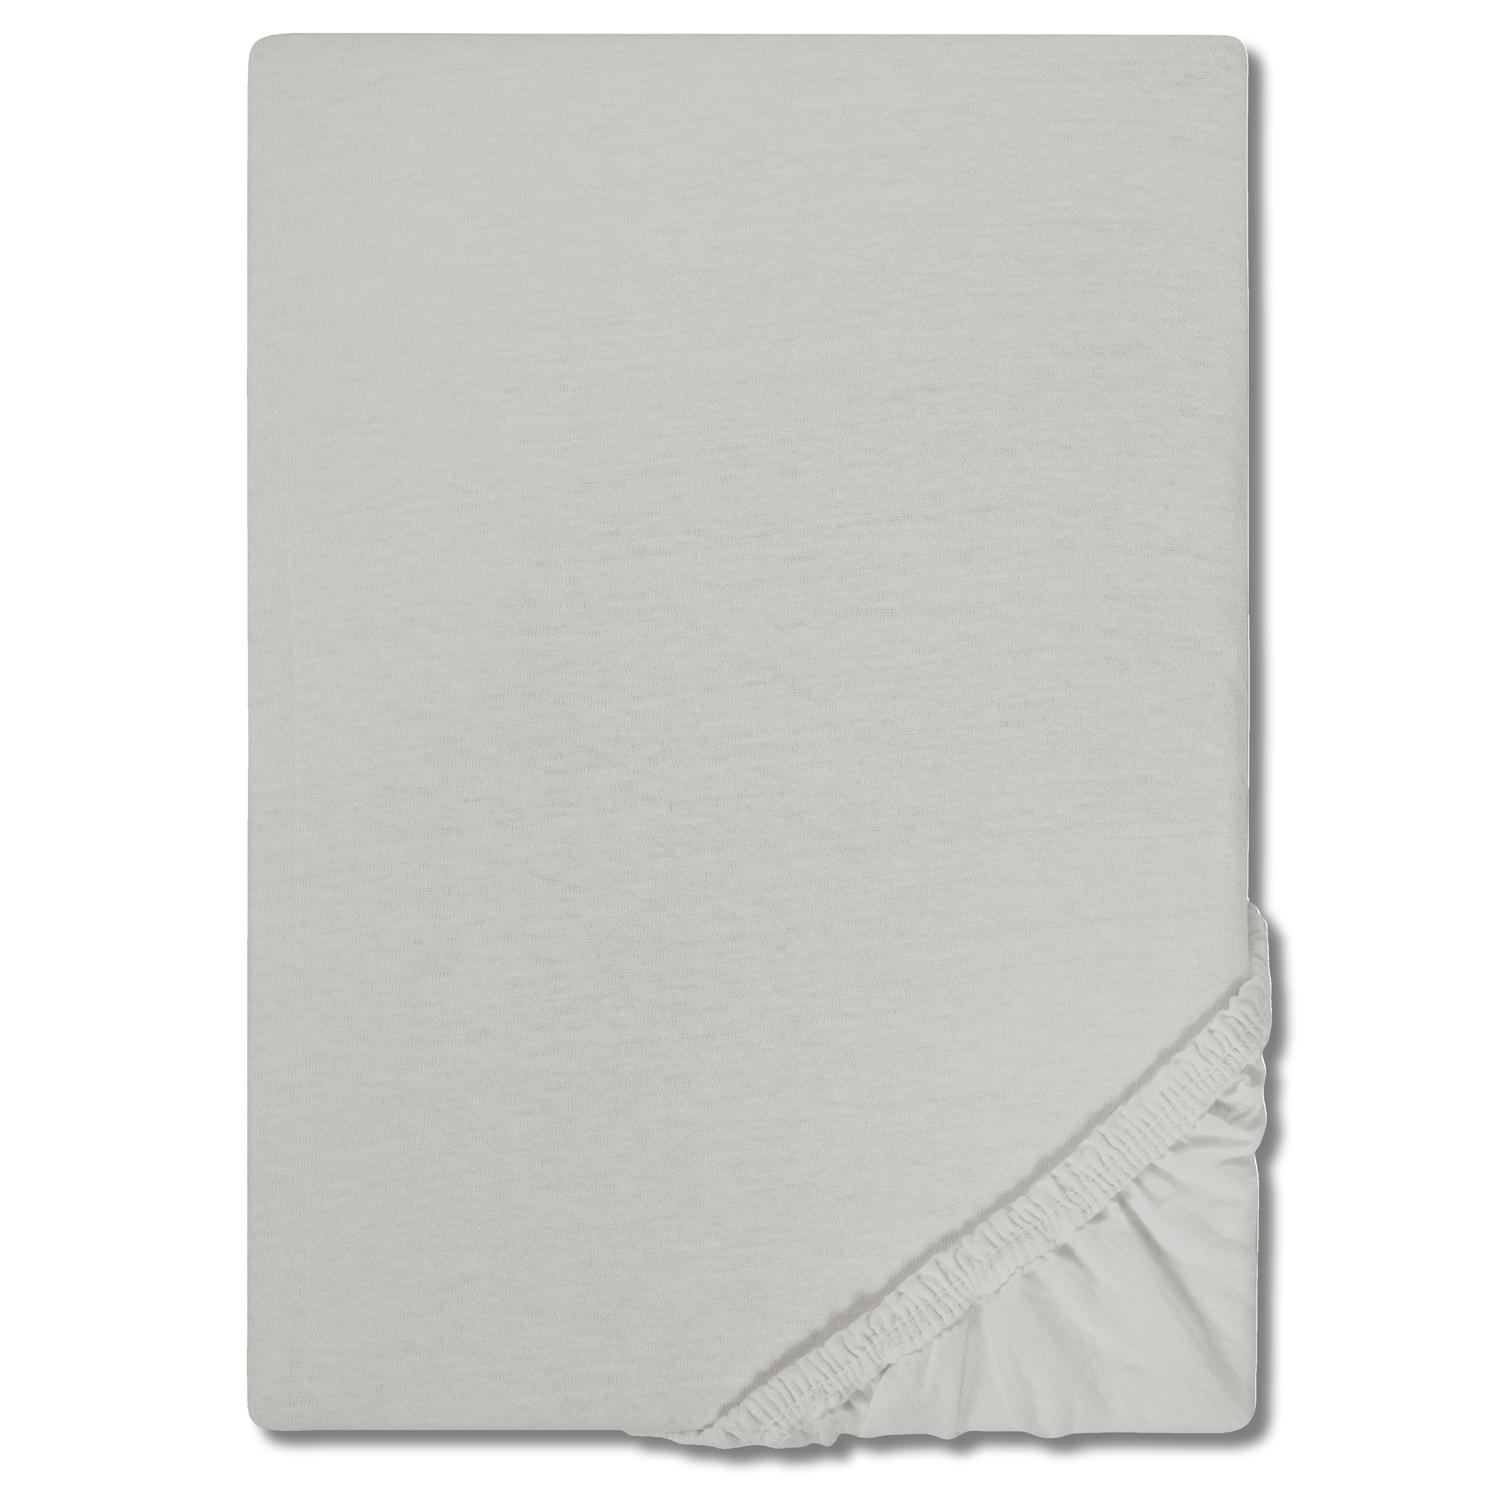 CloudComfort Basic fitted sheet jersey stretch silver gray 90 x 190 - 100 x 200 cm